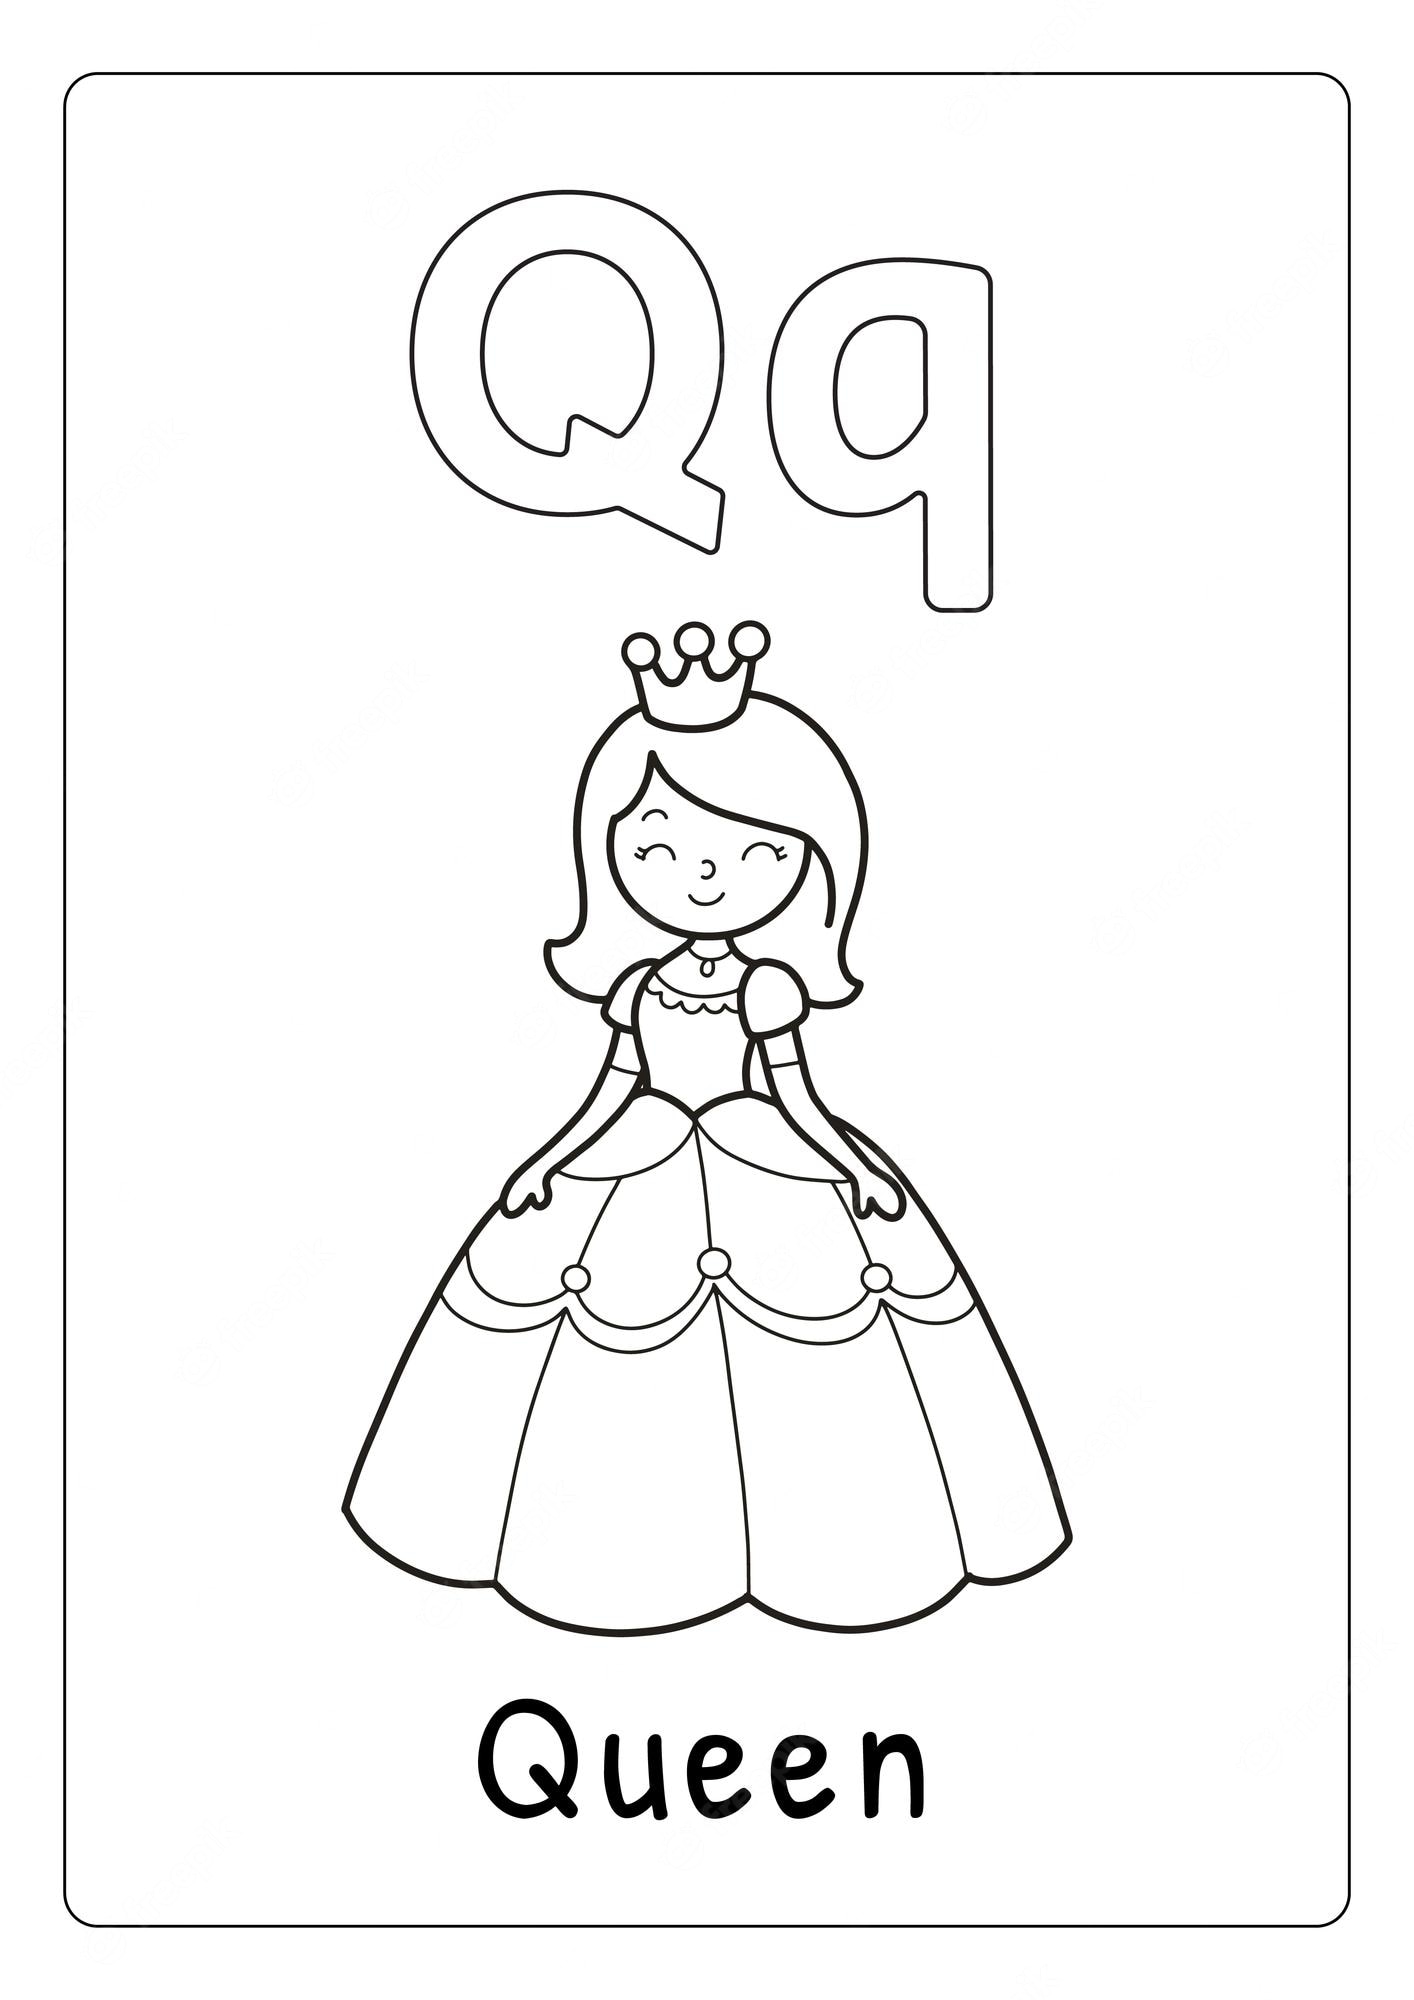 Premium Vector | Alphabet letter q for queen coloring page for kids